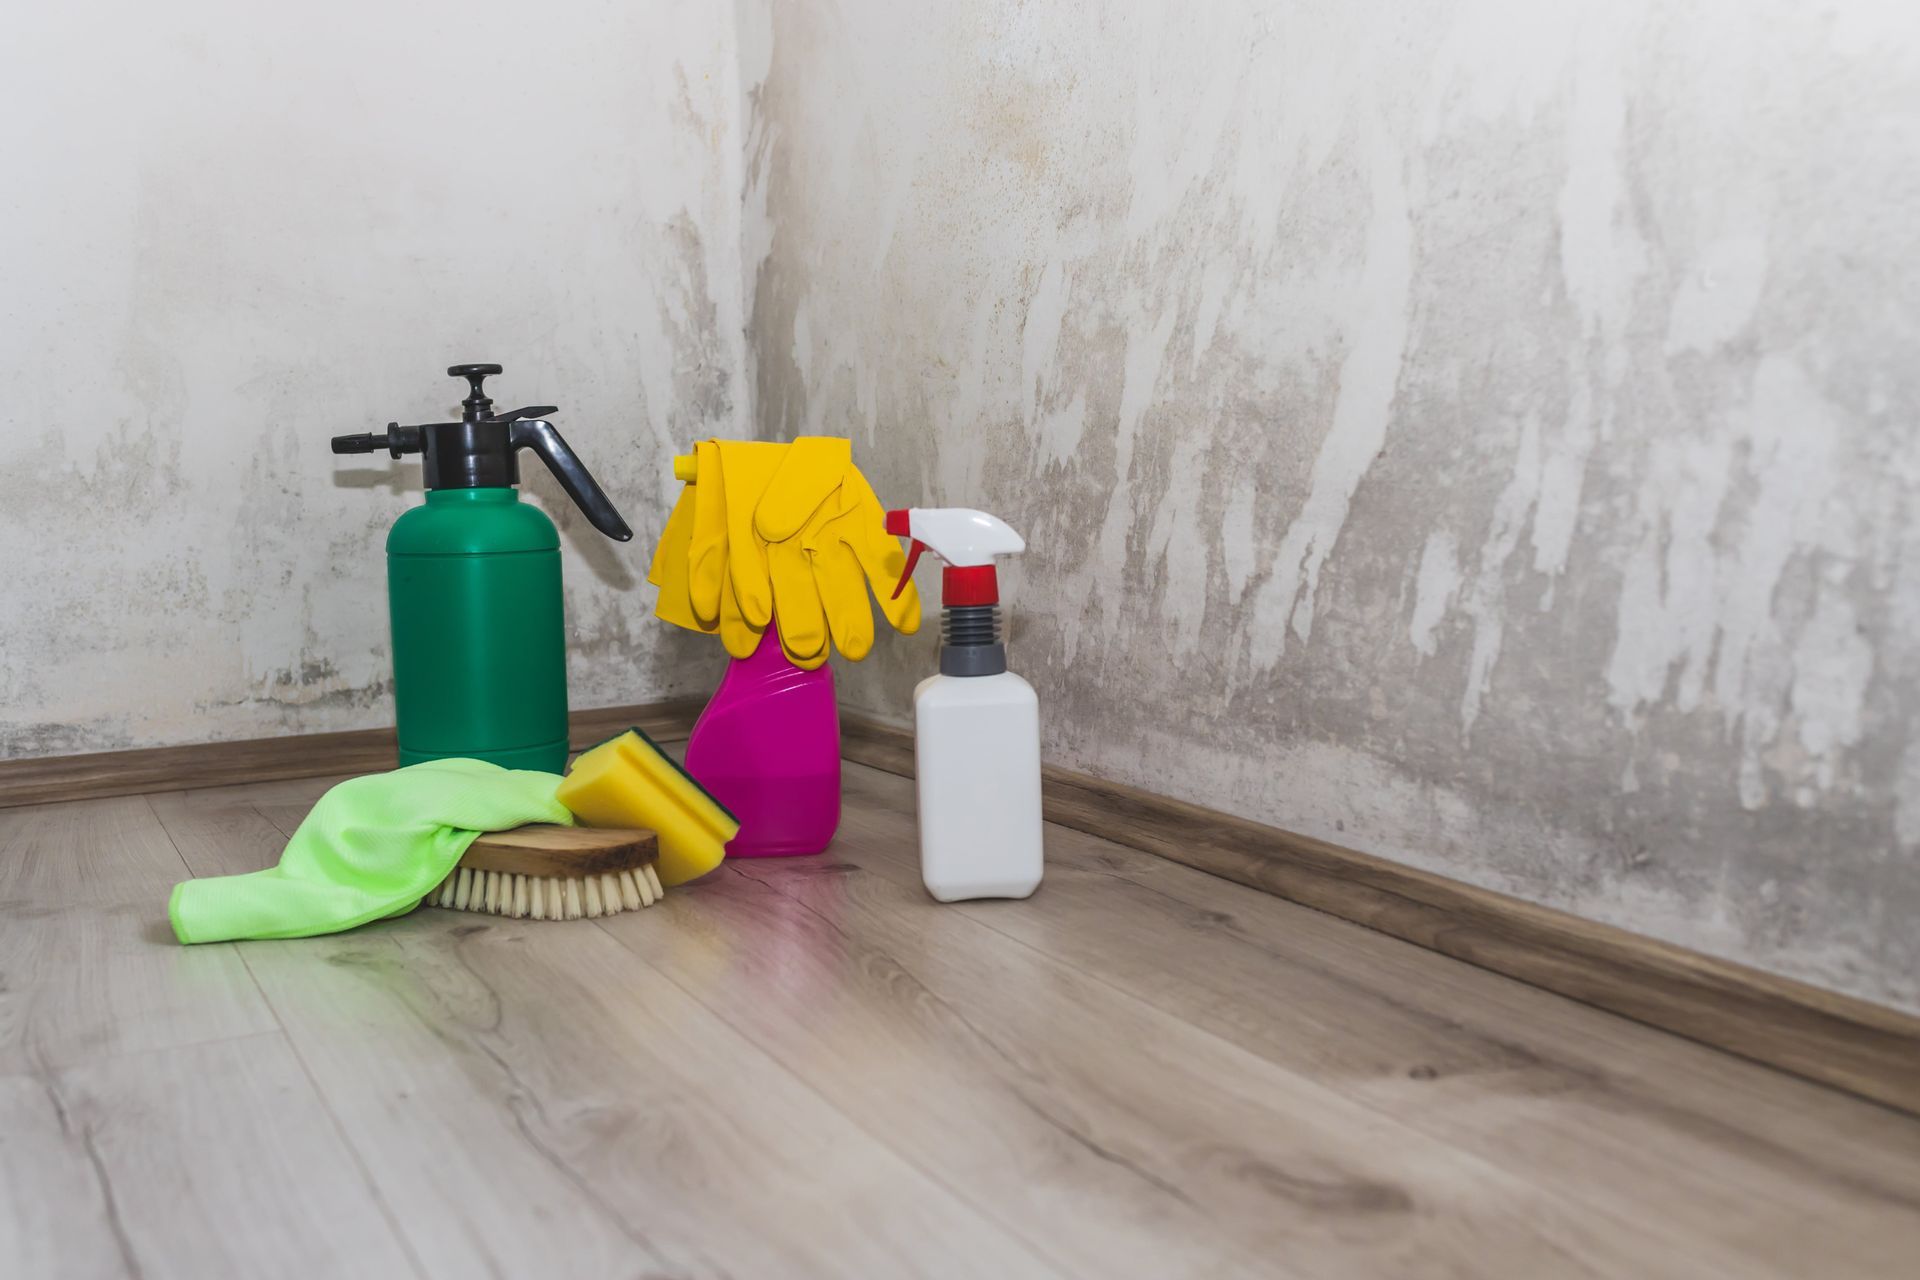 Mold removal products for residential and commercial properties.